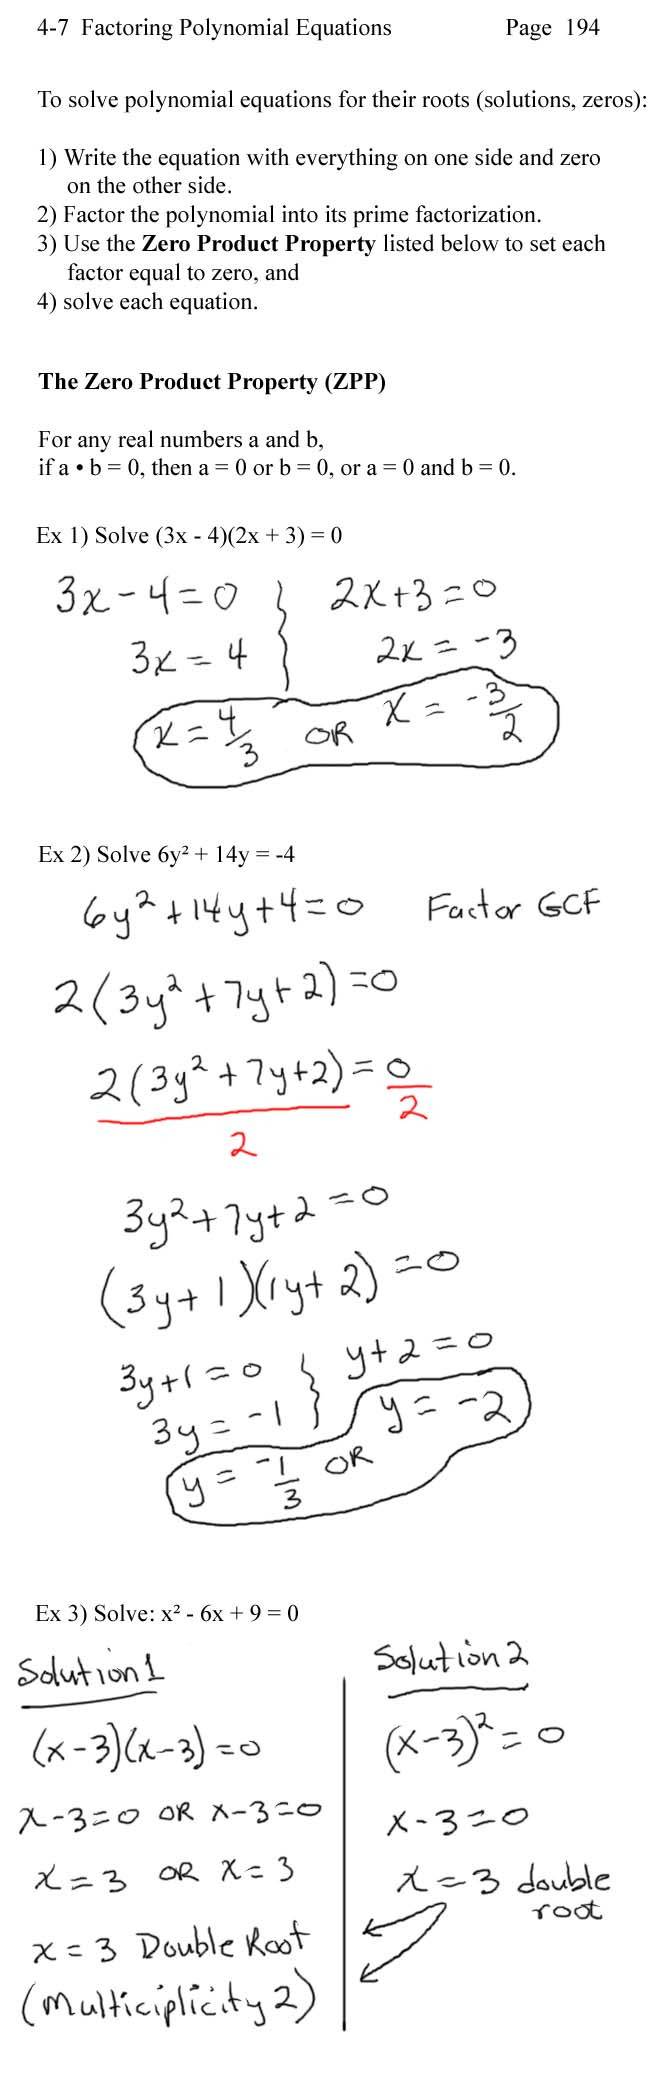 Solving Polynomial Equations Worksheet Answers Algebra 2 5 3 solving Polynomial Equations Worksheet